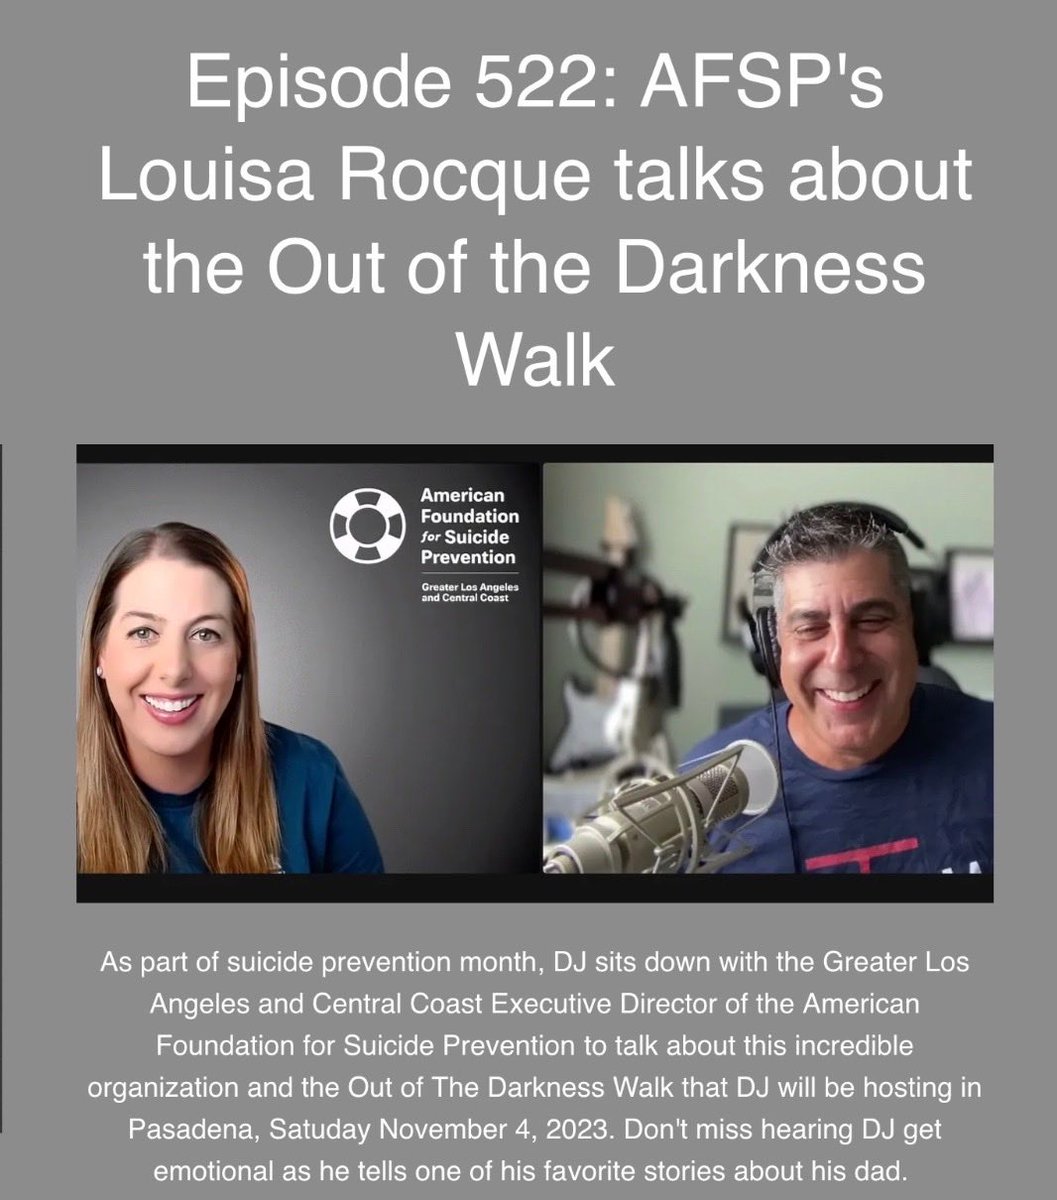 The latest episode of A Million Little Stories is out, featuring an interview with @AFSP’s Louisa Rocque. Check it out at AMillionLittleStories.com or wherever you get your podcasts!